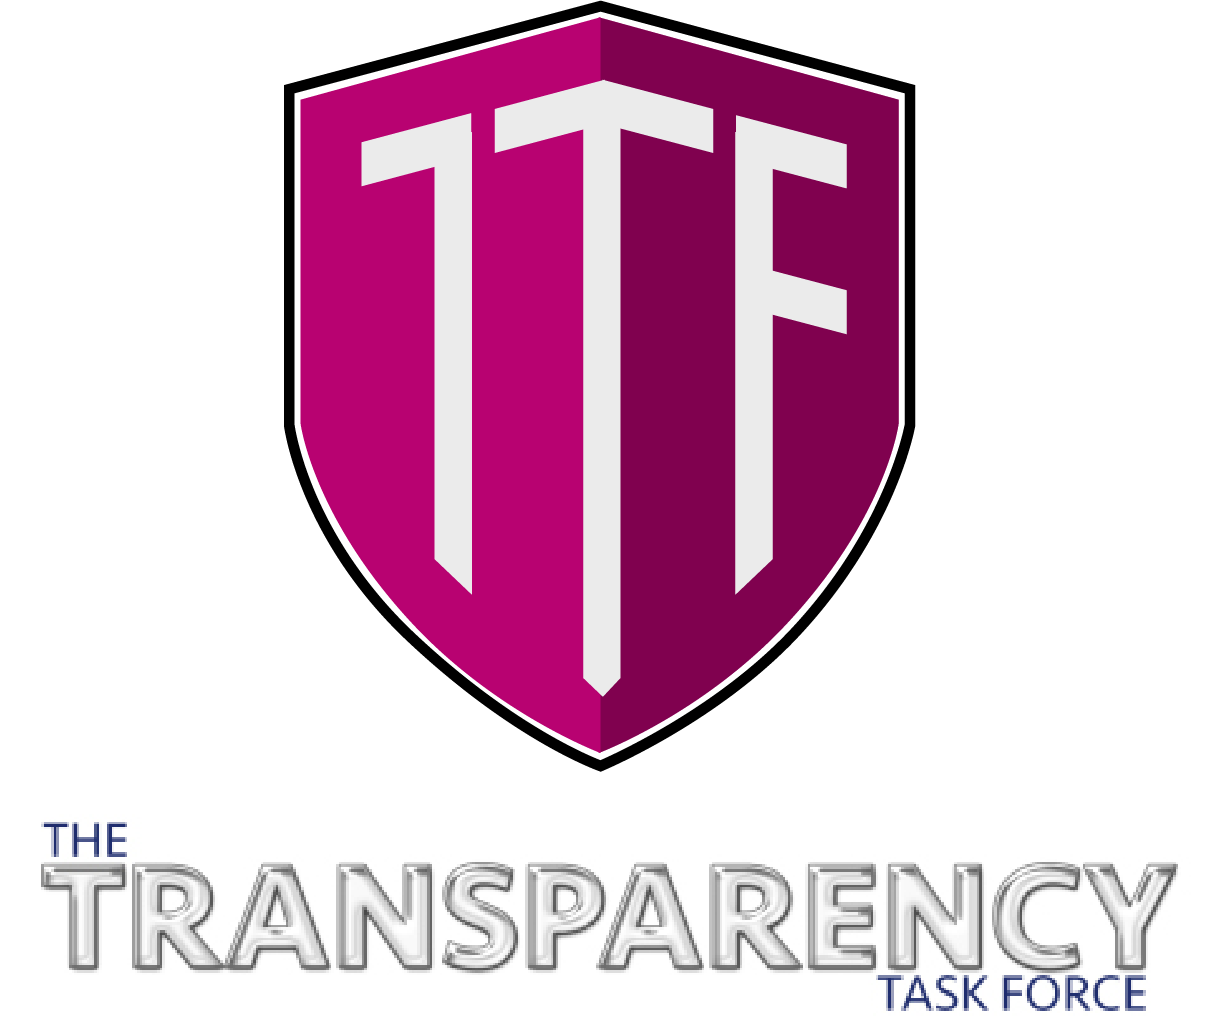  "THE PERILS OF PENSION SCAMS" organized by The Transparency Task Force